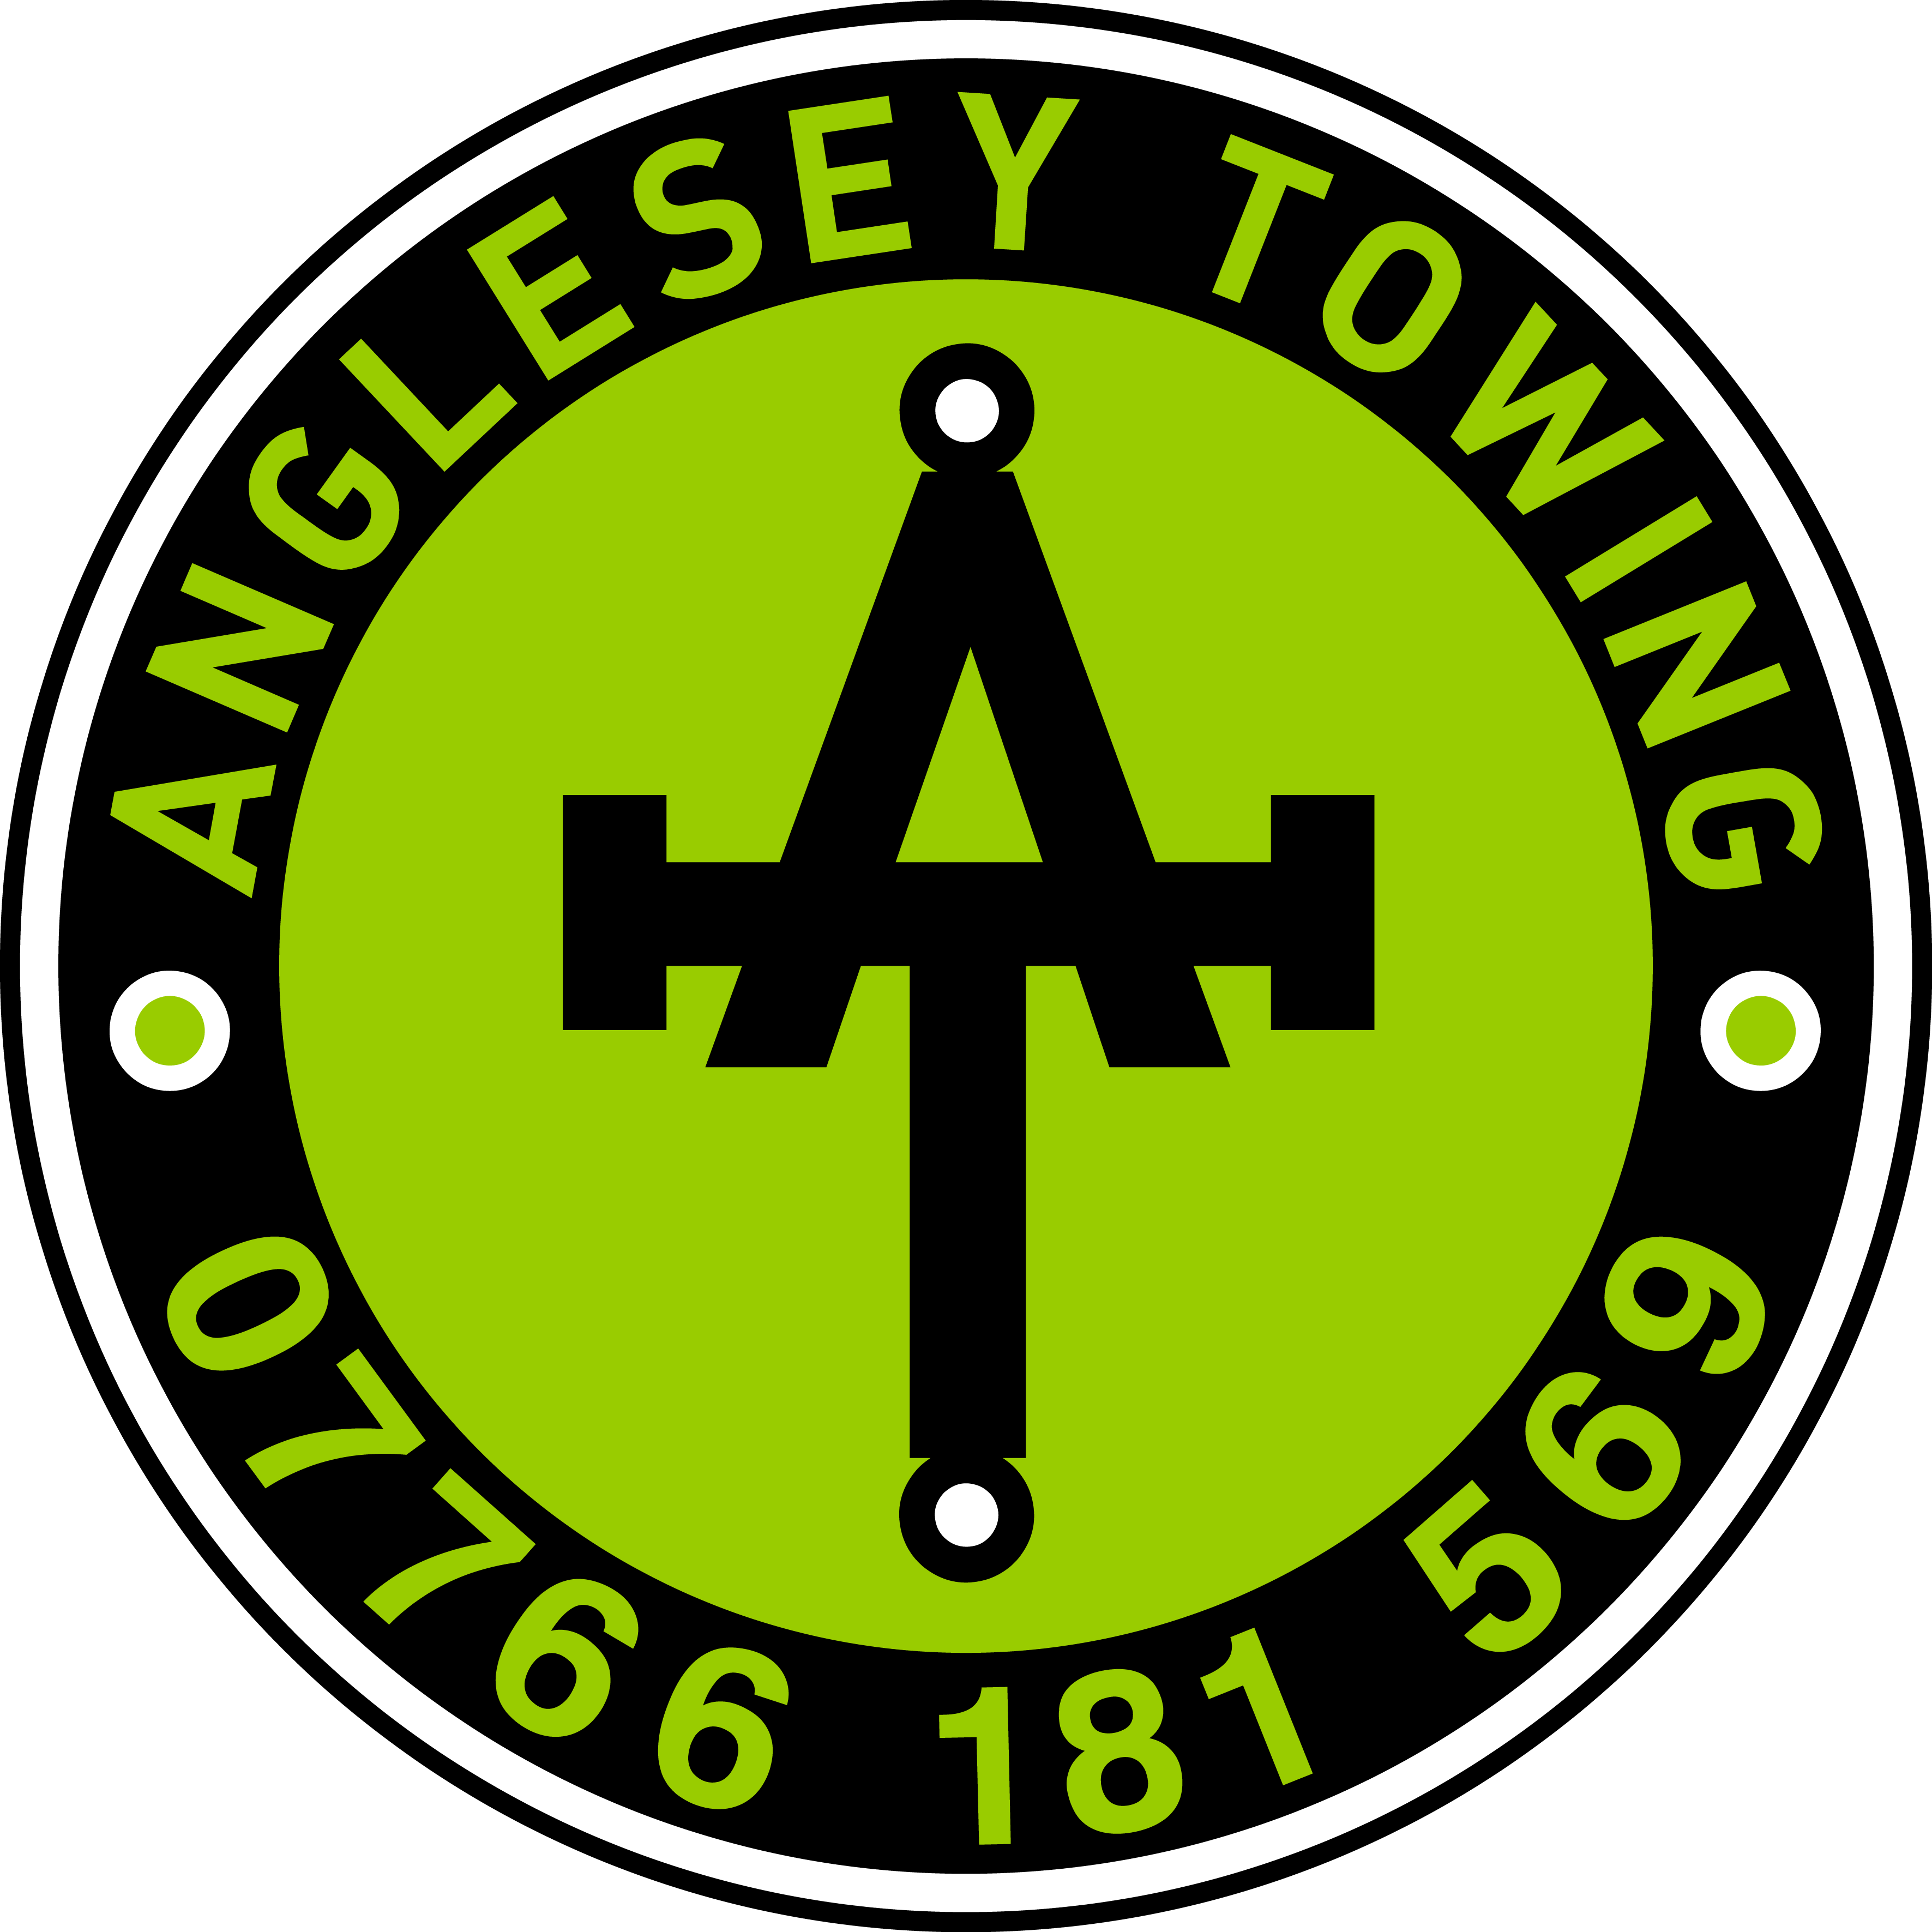 Anglesey towing